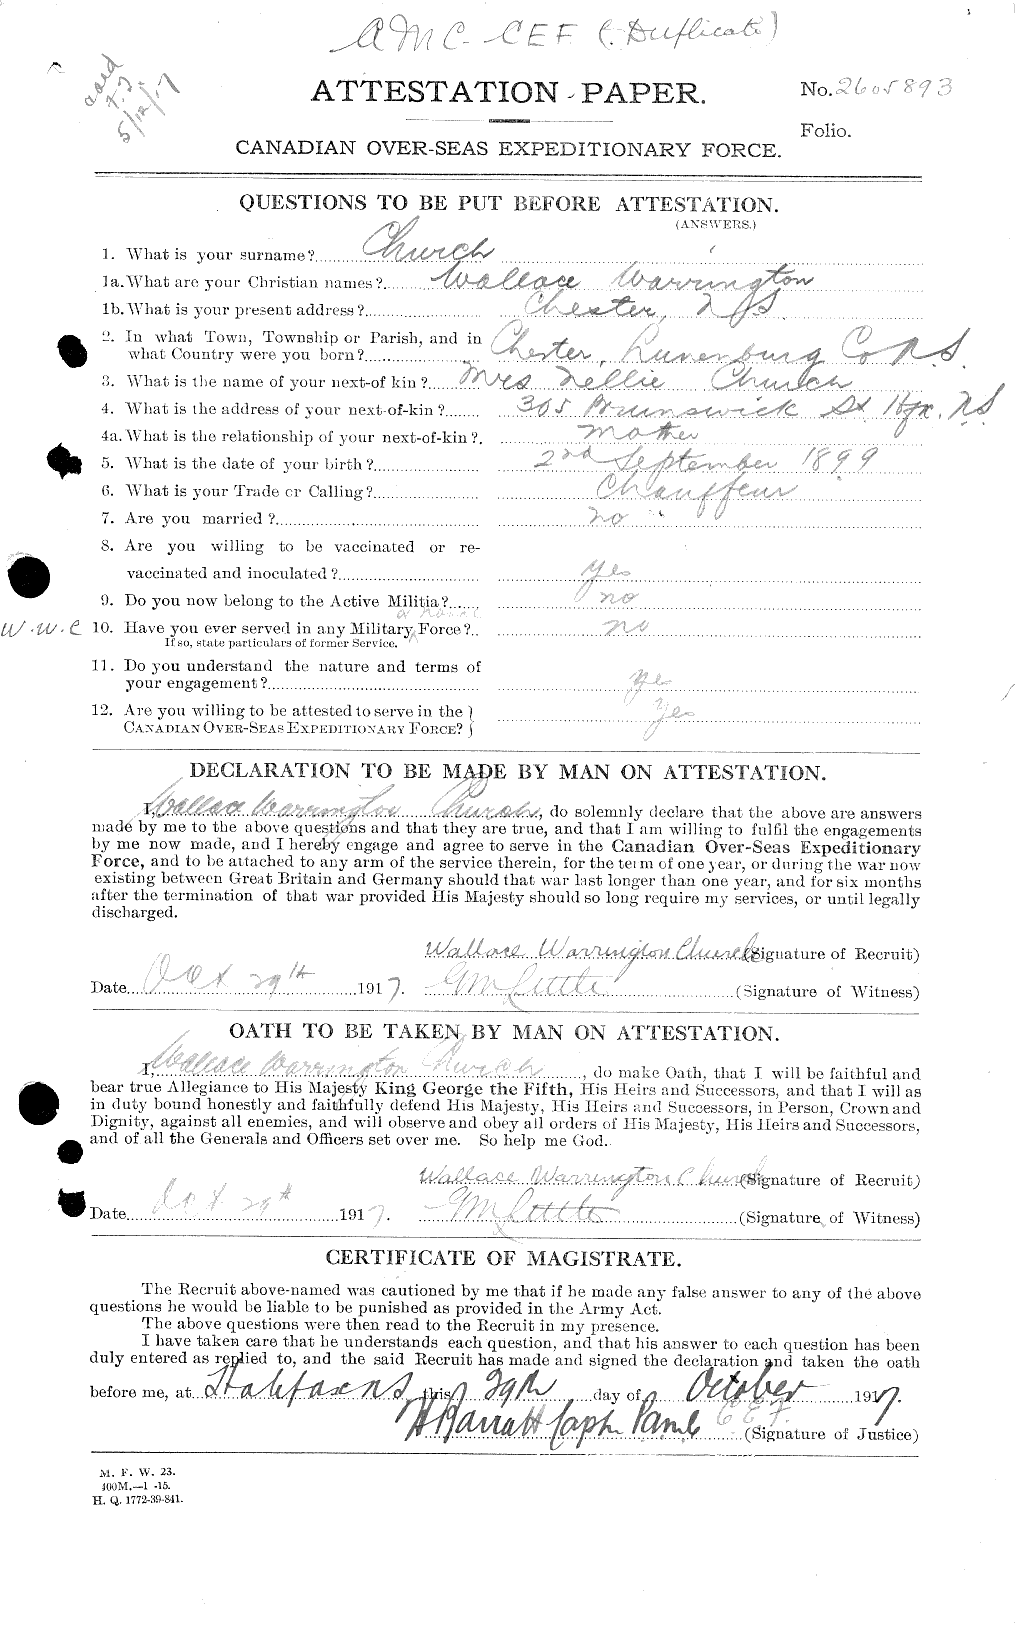 Personnel Records of the First World War - CEF 022388a